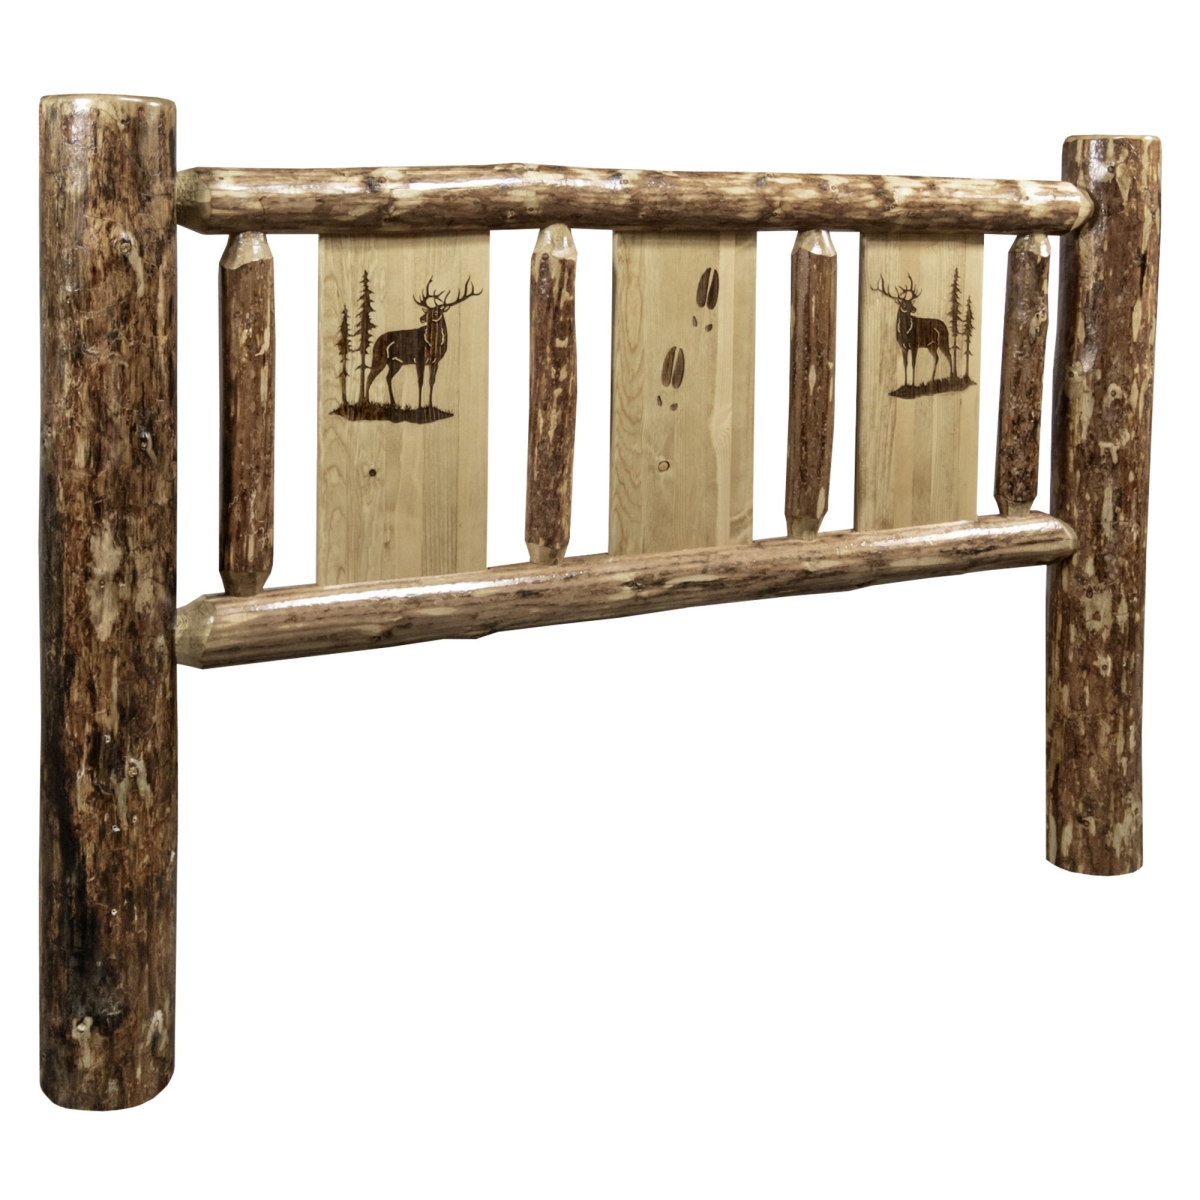 Picture of Montana Woodworks MWGCKHBLZELK Glacier Country Collection Headboard with Laser Engraved Elk Design - King Size